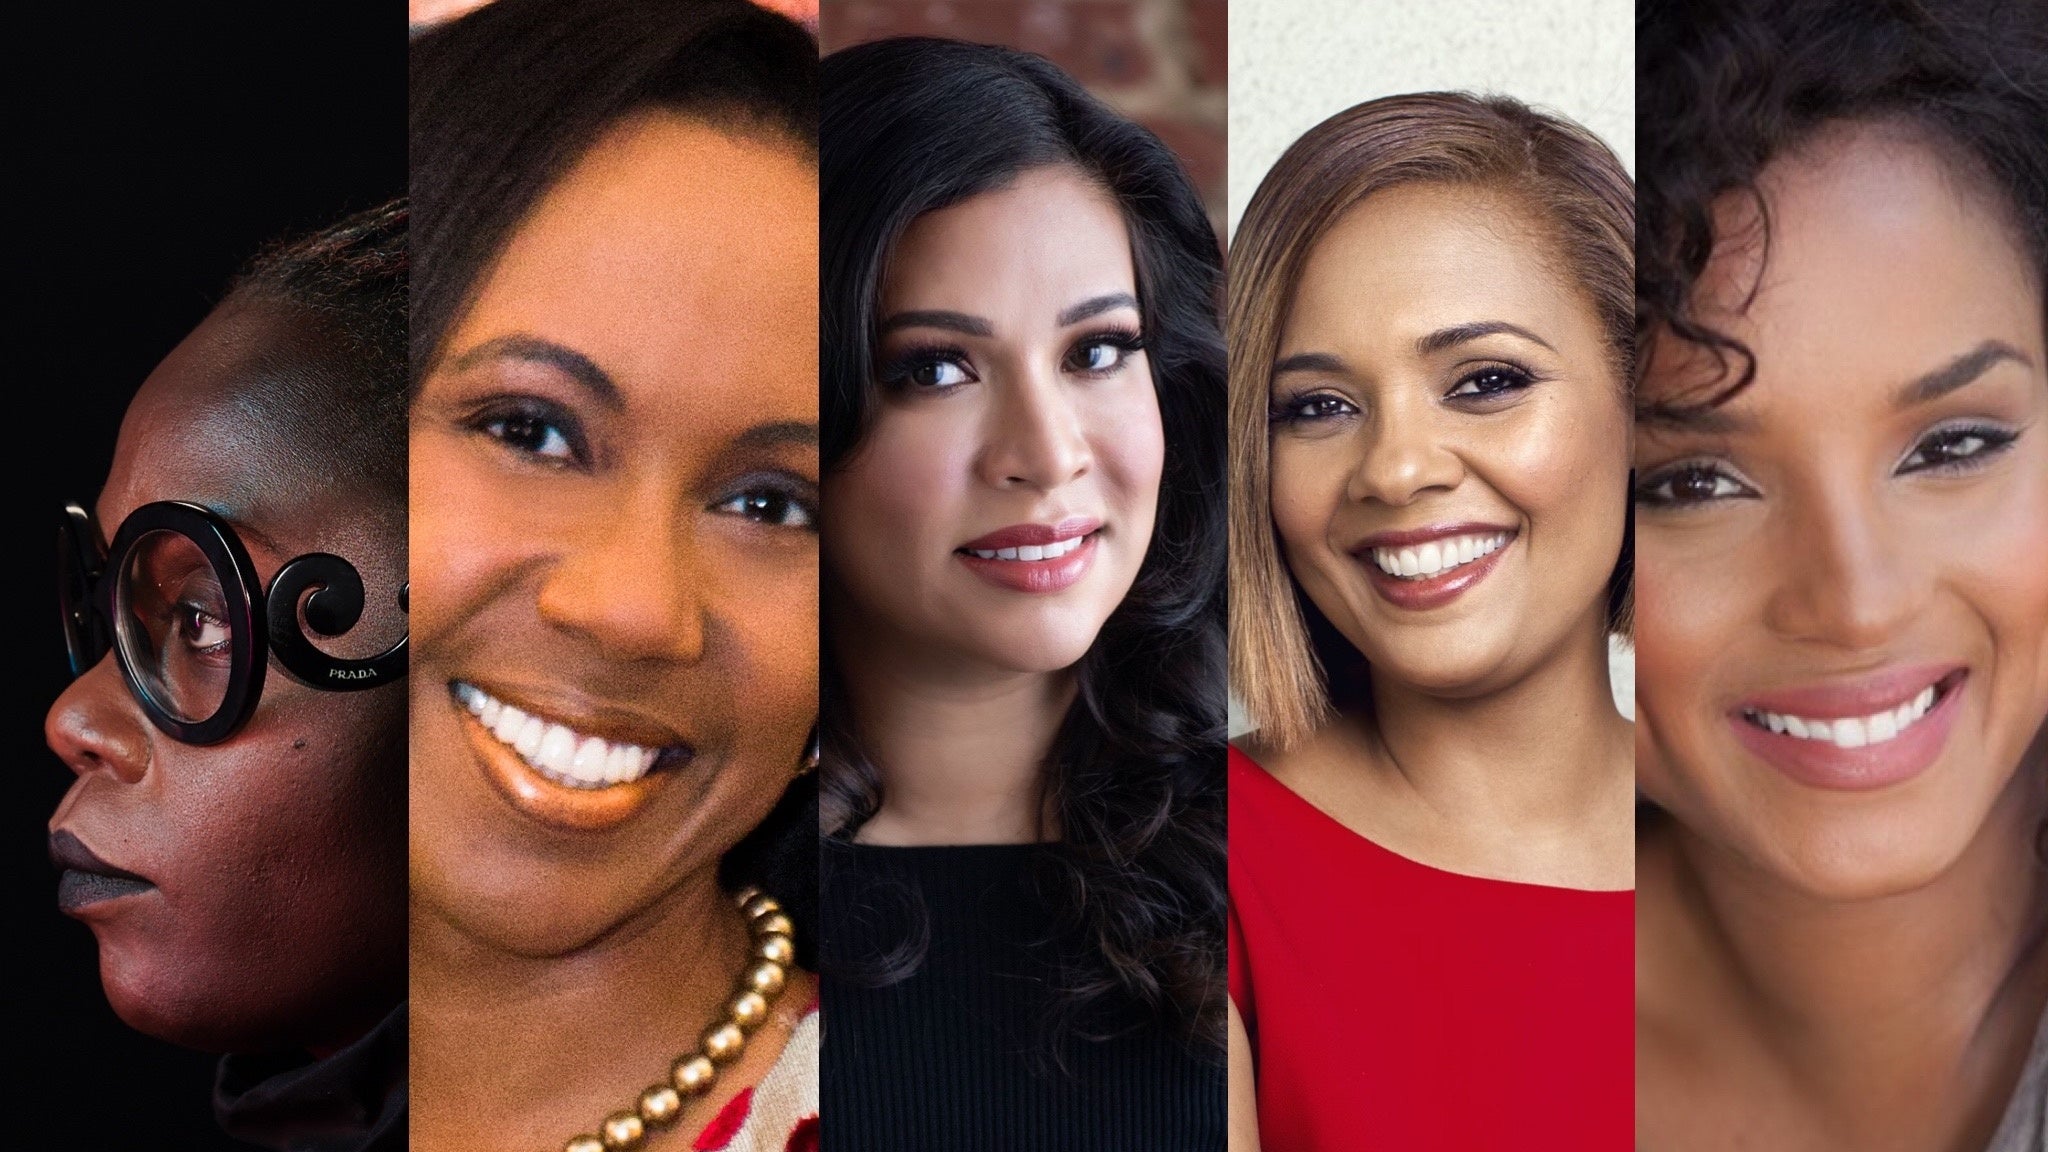 ESSENCE Appoints Executive Team To Lead Company's Strategic Realignment, Innovation Focus And Community Impact